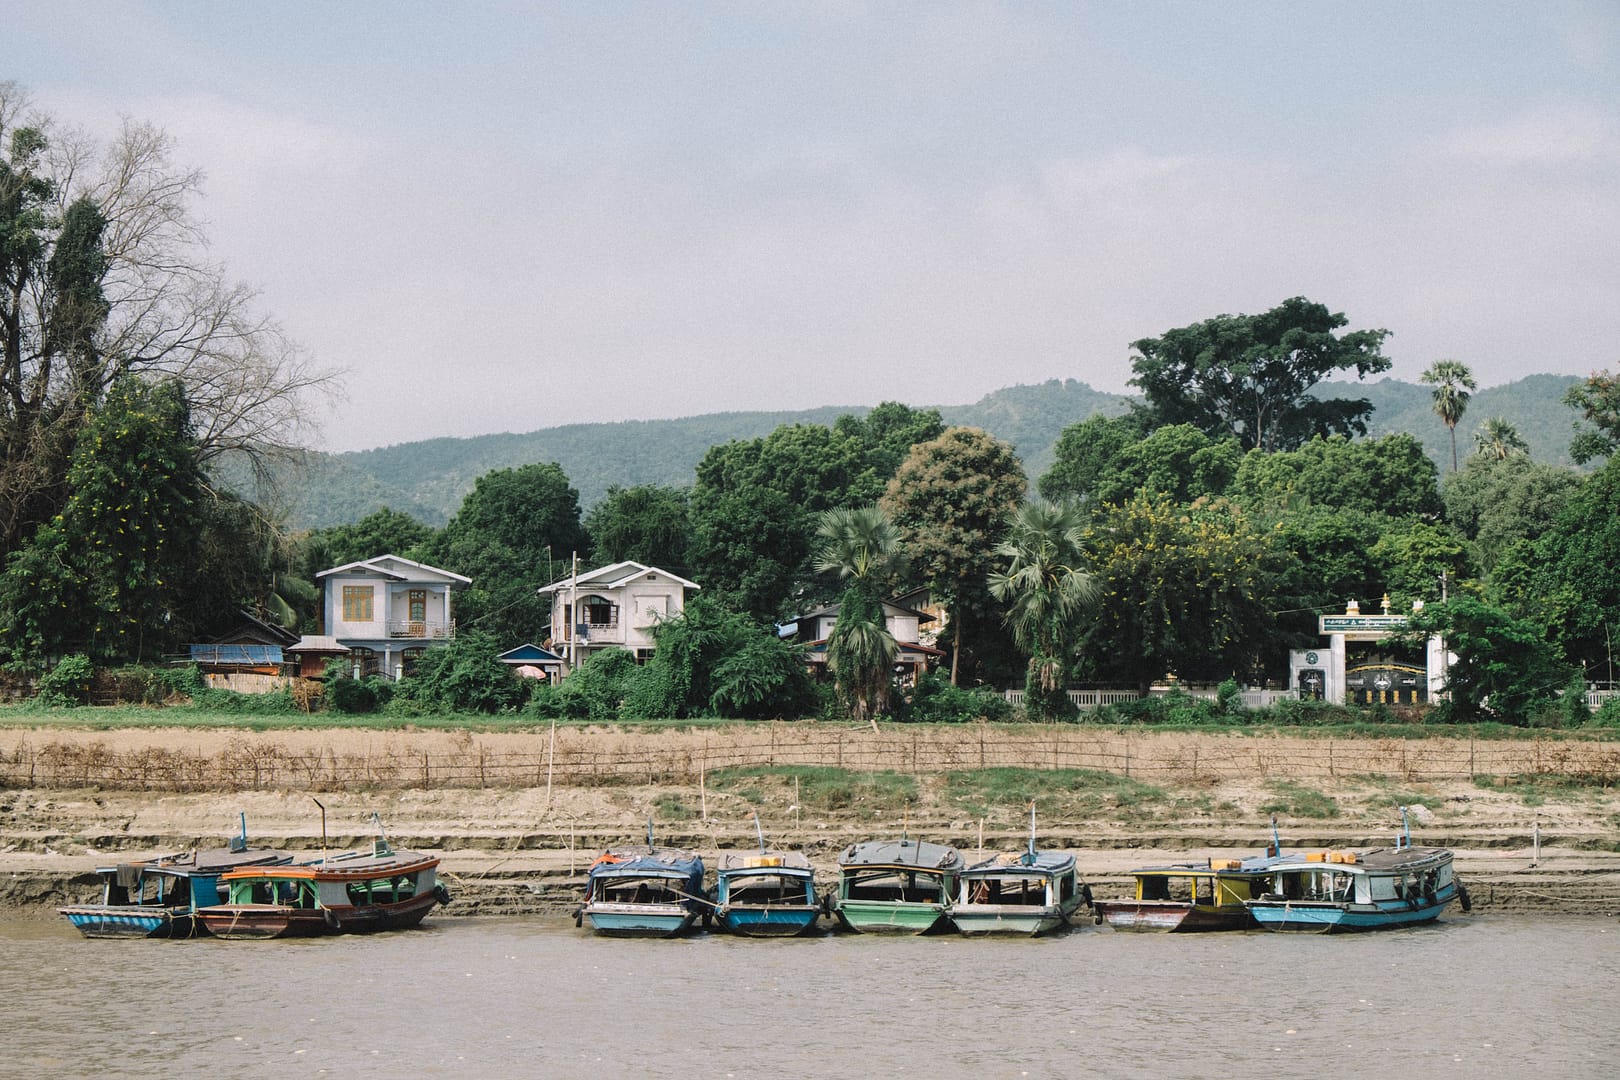 30 Photos That Will Convince You to Travel to Myanmar